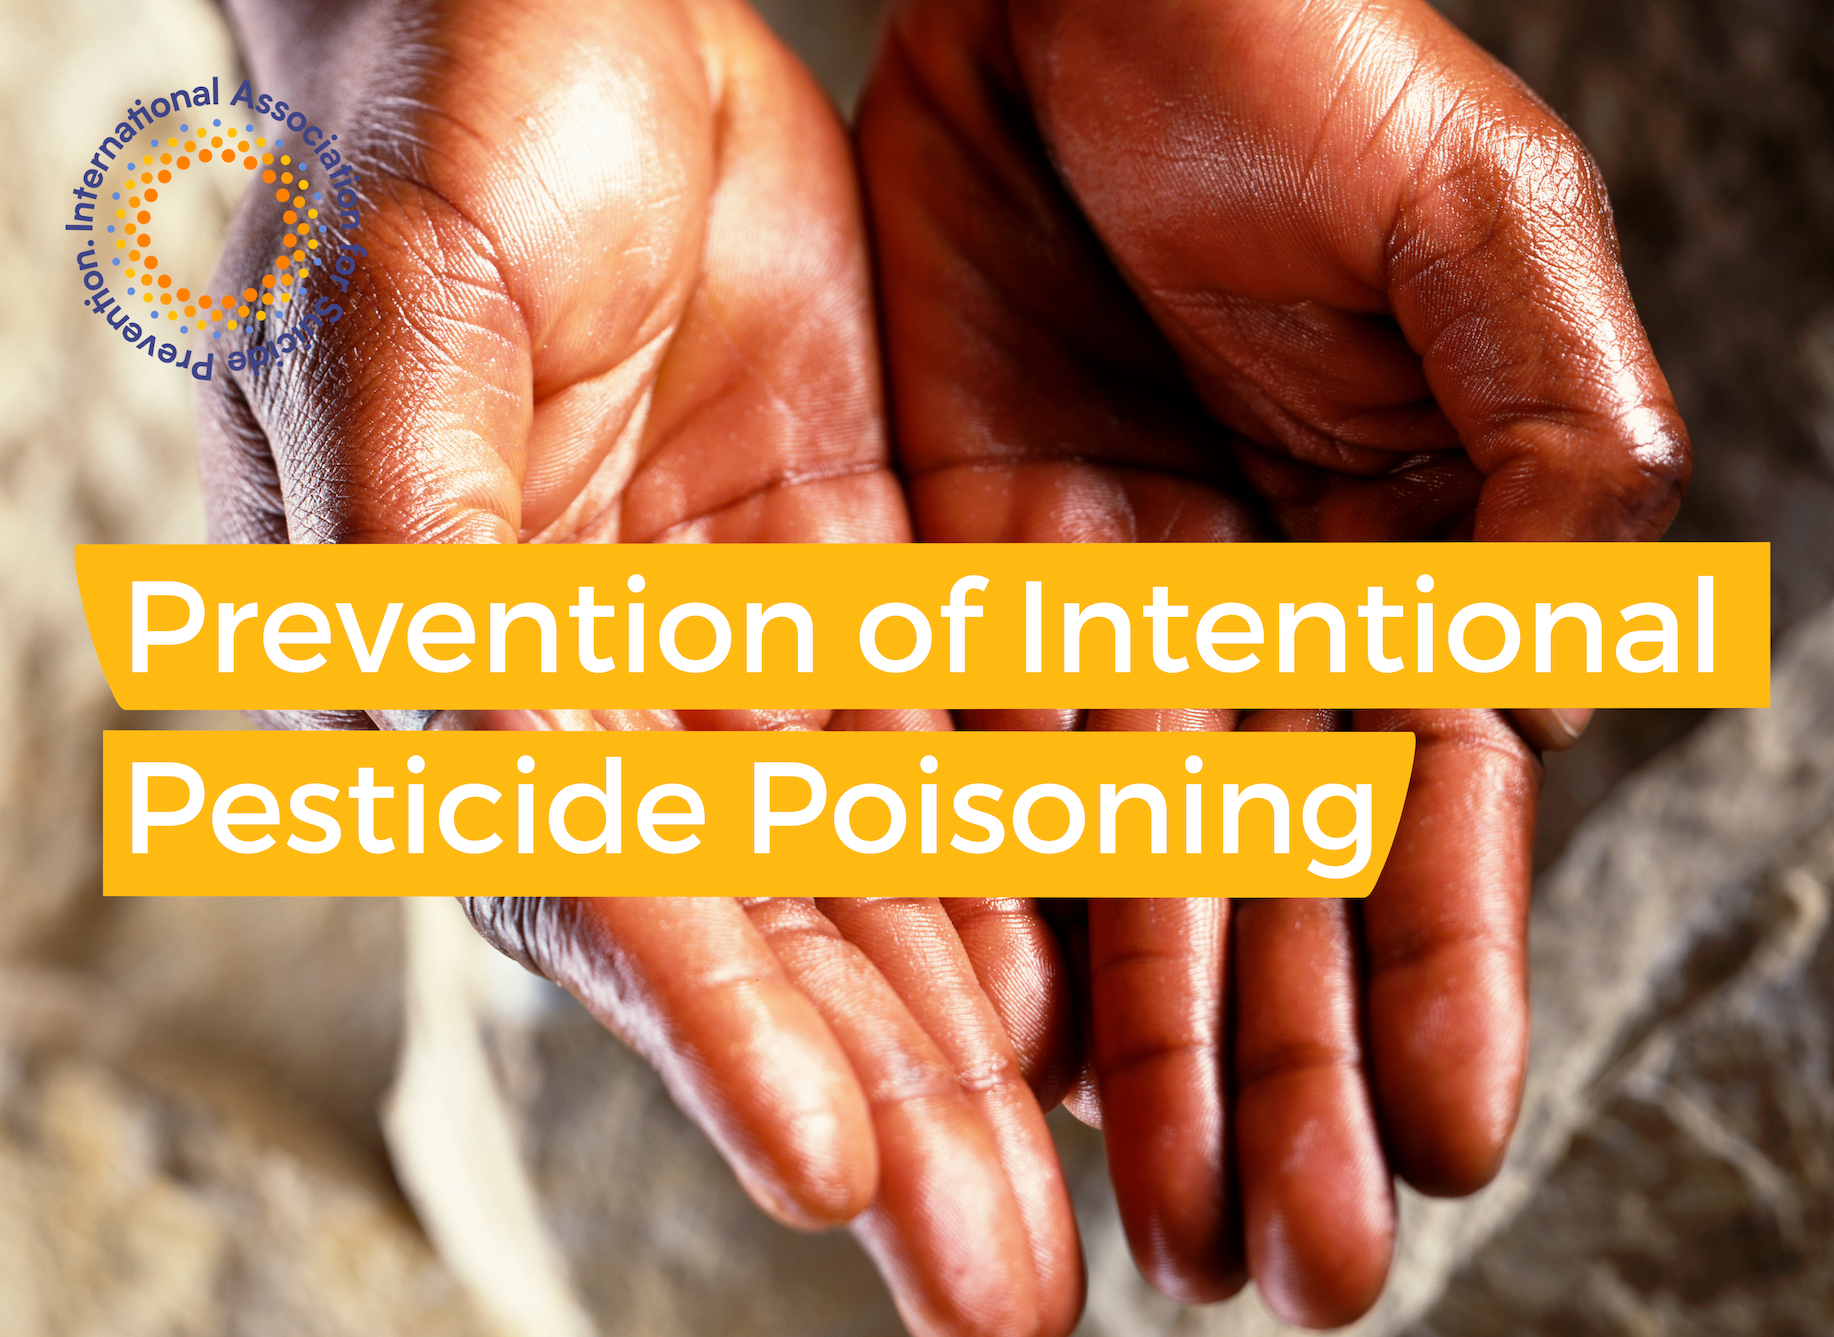 Prevention of Intentional Pesticide Poisoning